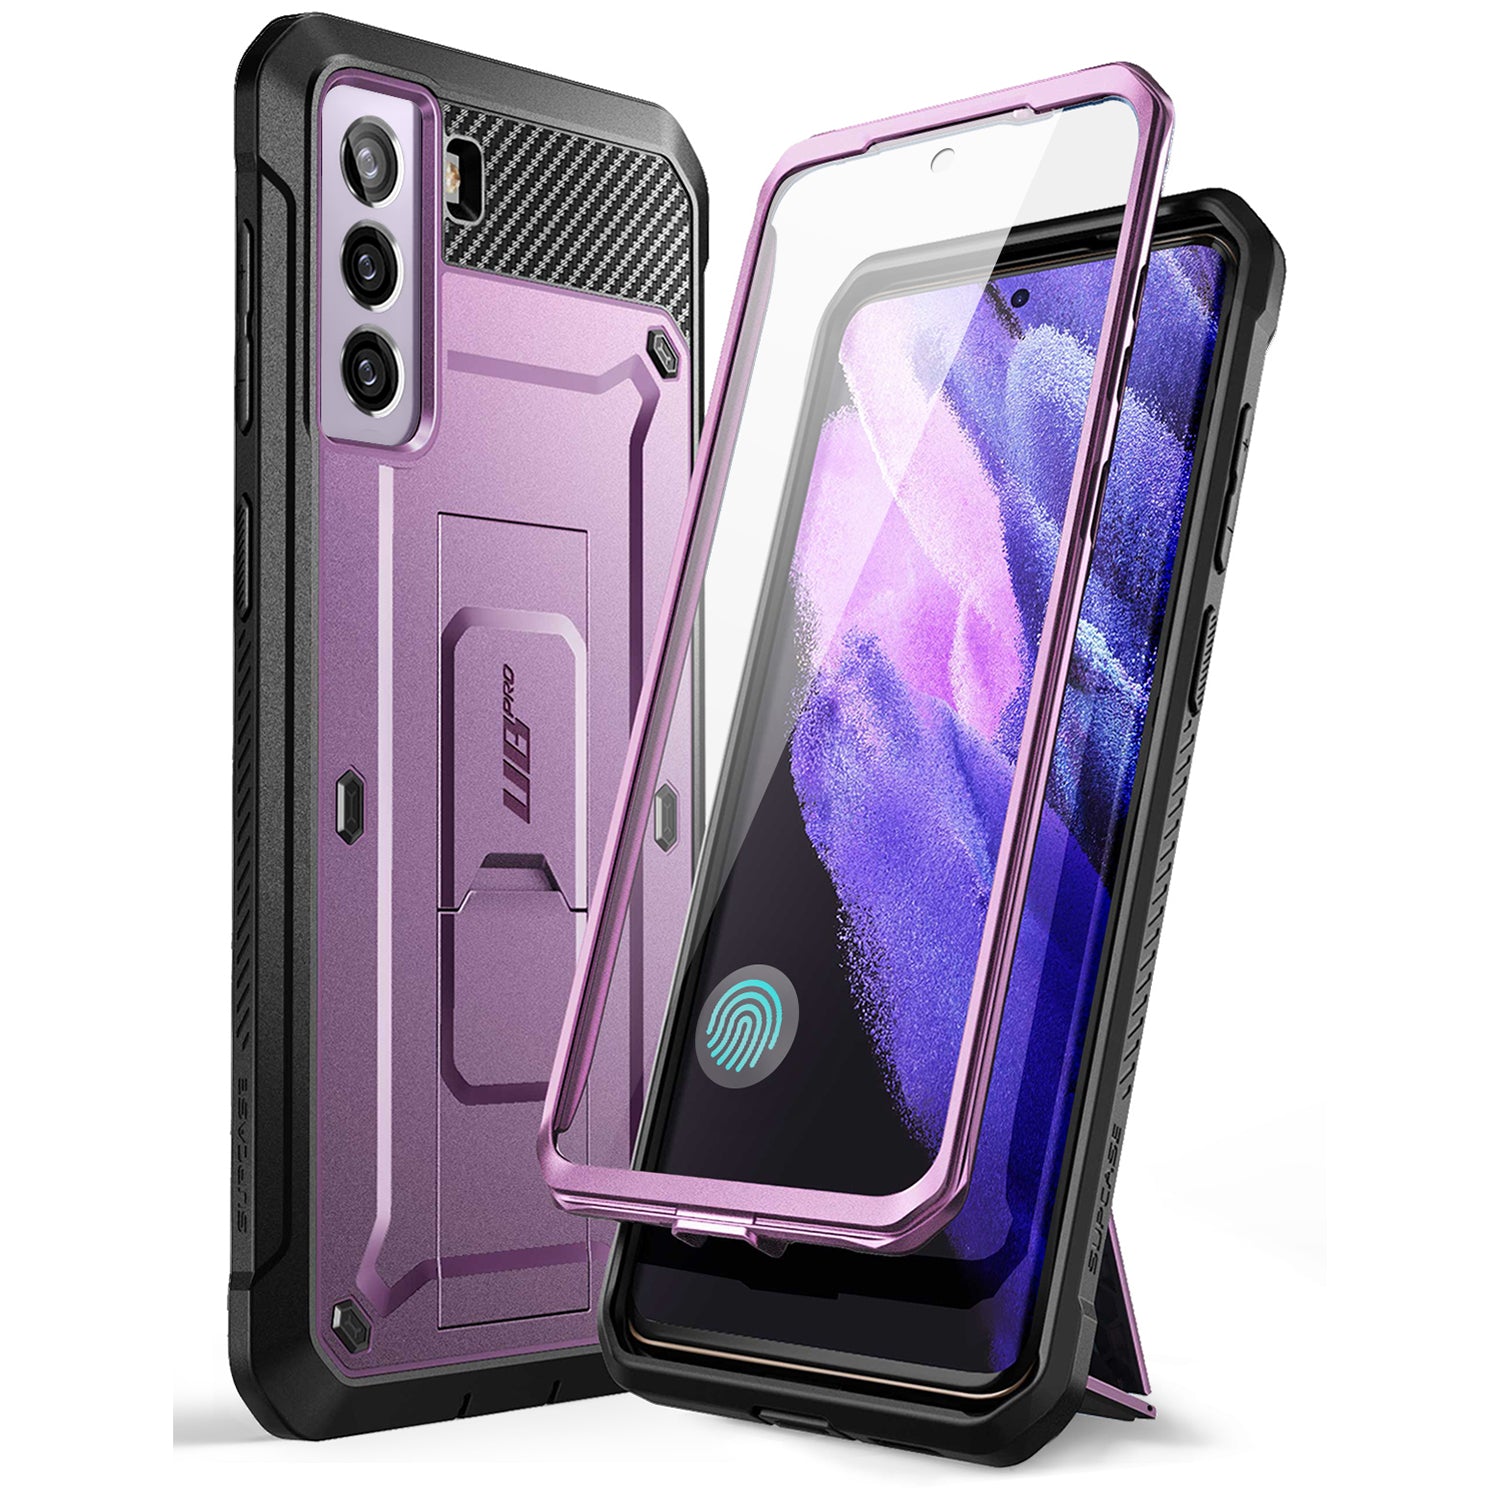 Supcase Unicorn Beetle Pro Series Full-Body Rugged Holster Case for Samsung Galaxy S21 FE(With built-in Screen Protector) Default Supcase Violte 